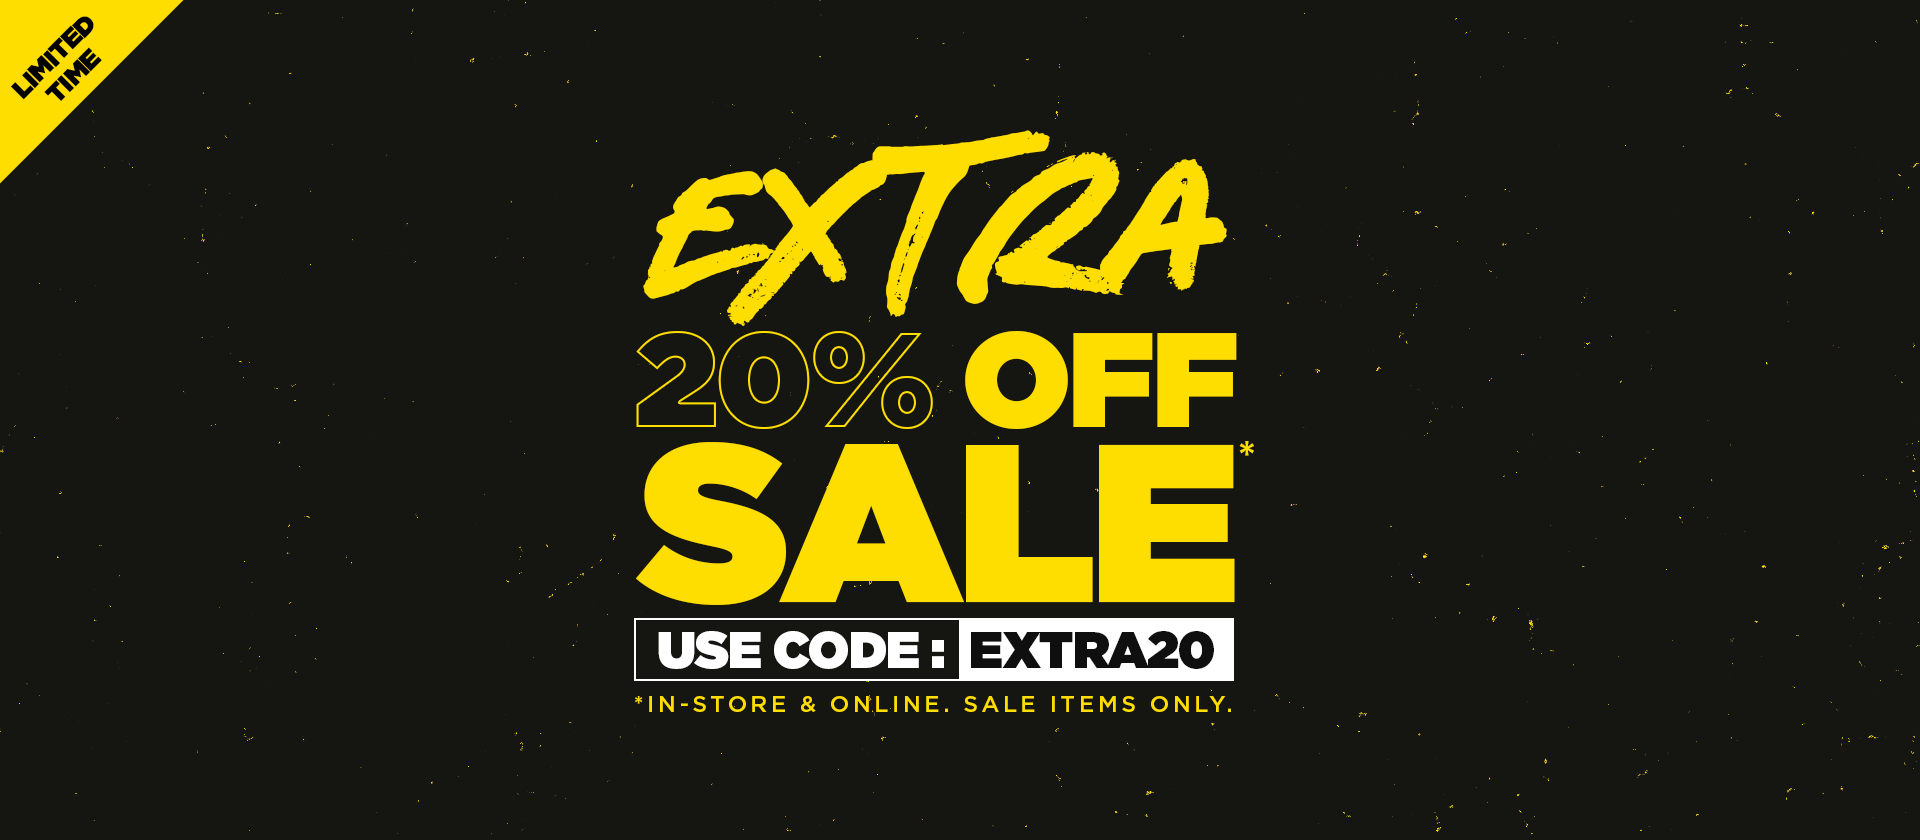 JD Sports - Extra 20% OFF on sale styles with promo code